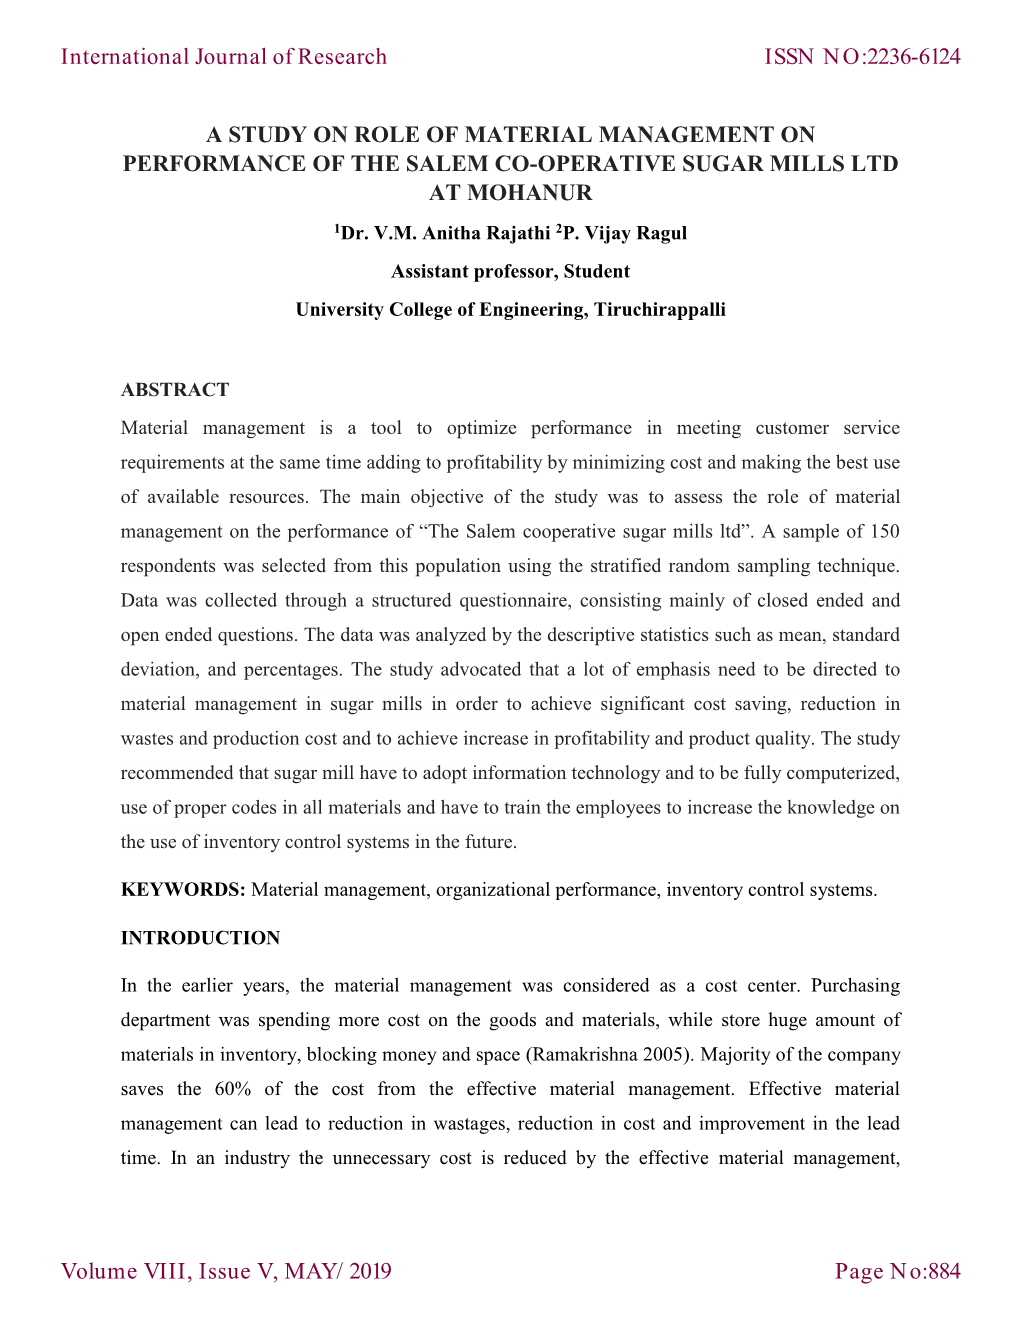 A STUDY on ROLE of MATERIAL MANAGEMENT on PERFORMANCE of the SALEM CO-OPERATIVE SUGAR MILLS LTD at MOHANUR 1Dr